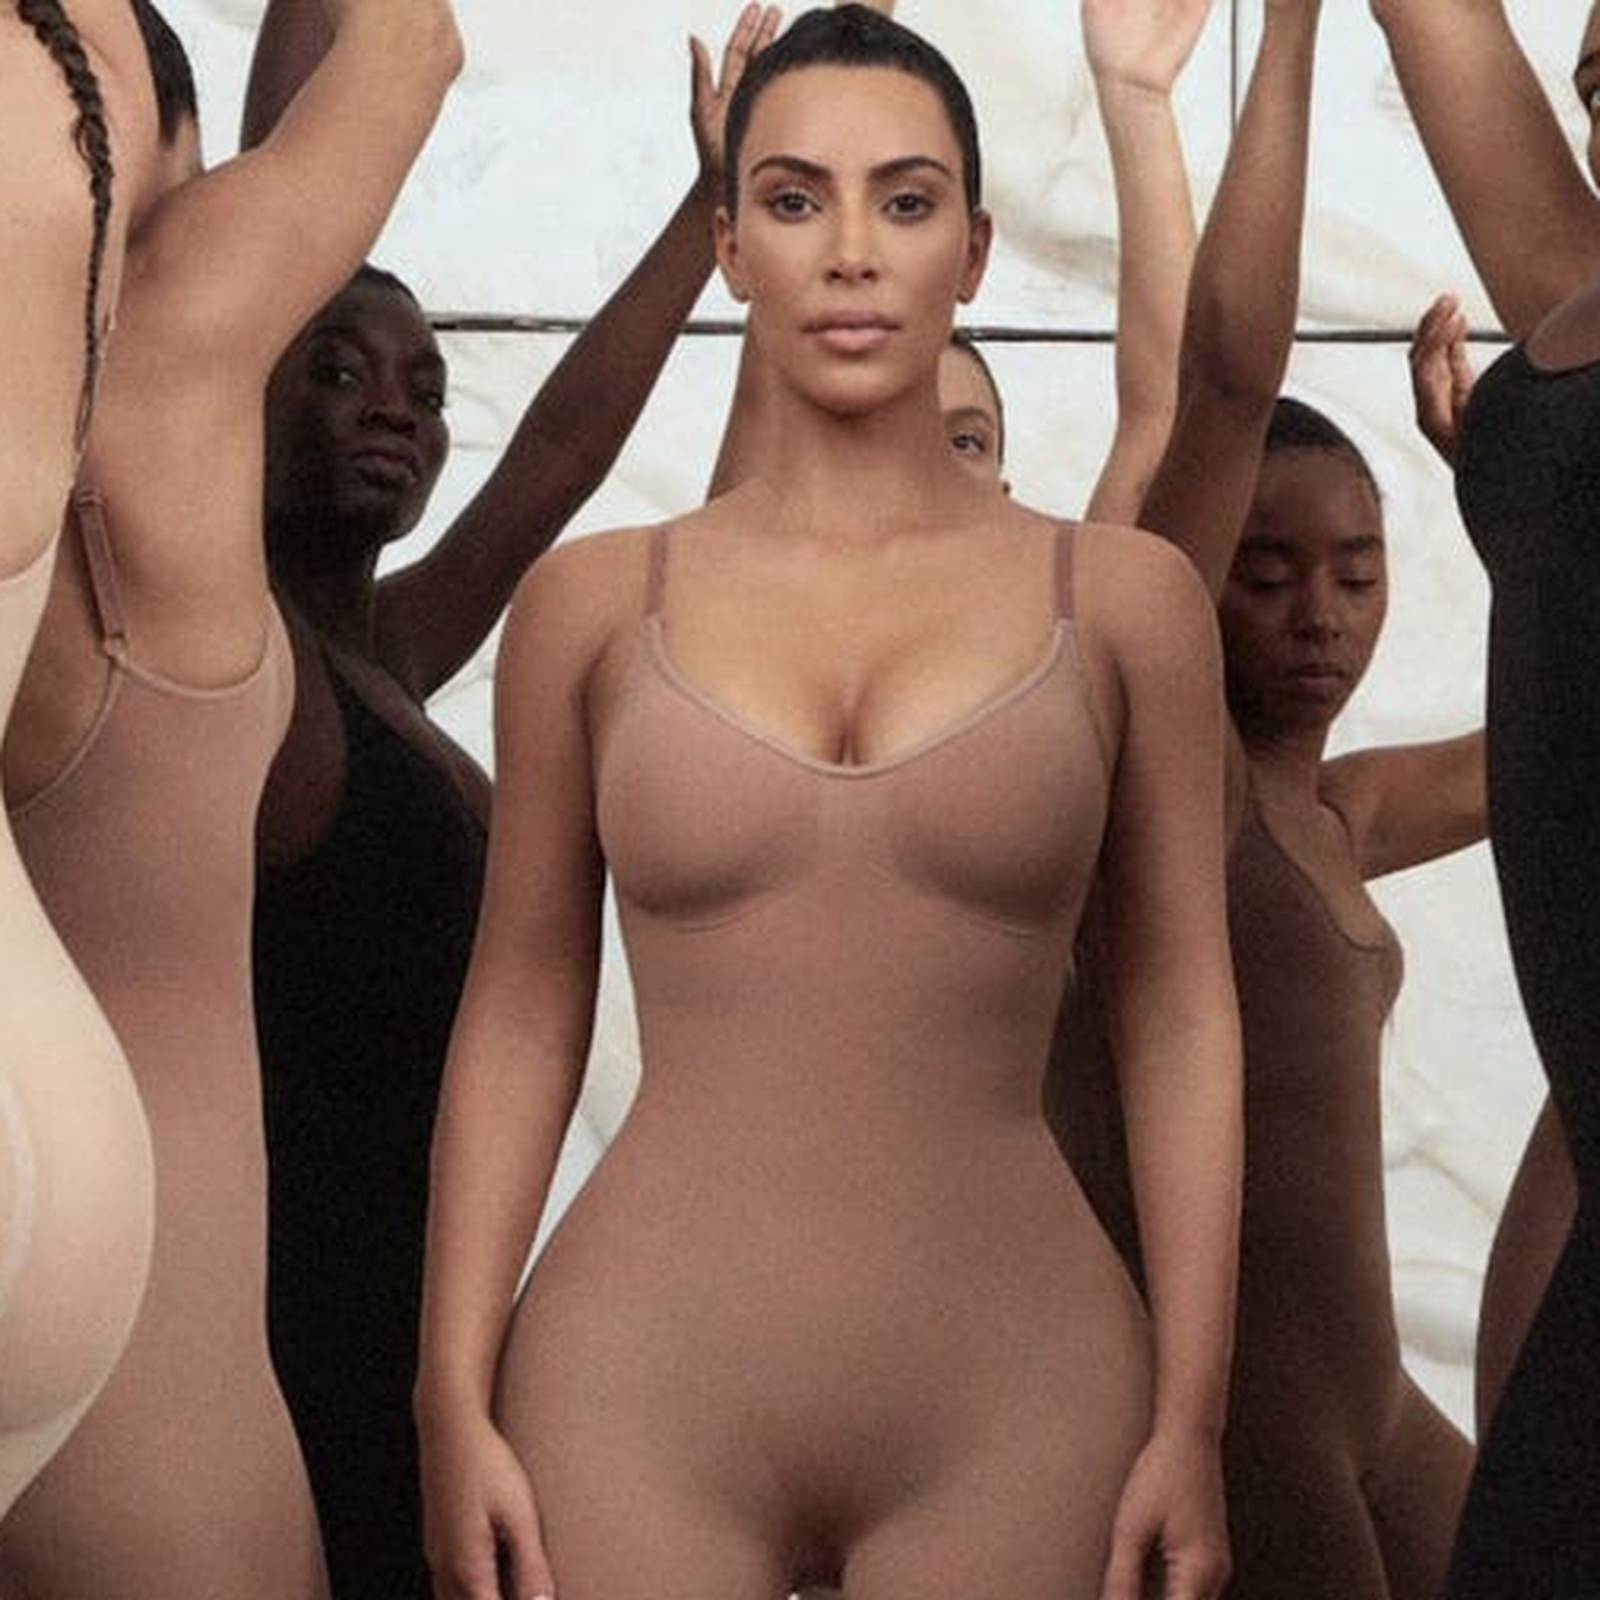 Kim Kardashian West didn't invent body shaming, but she is building